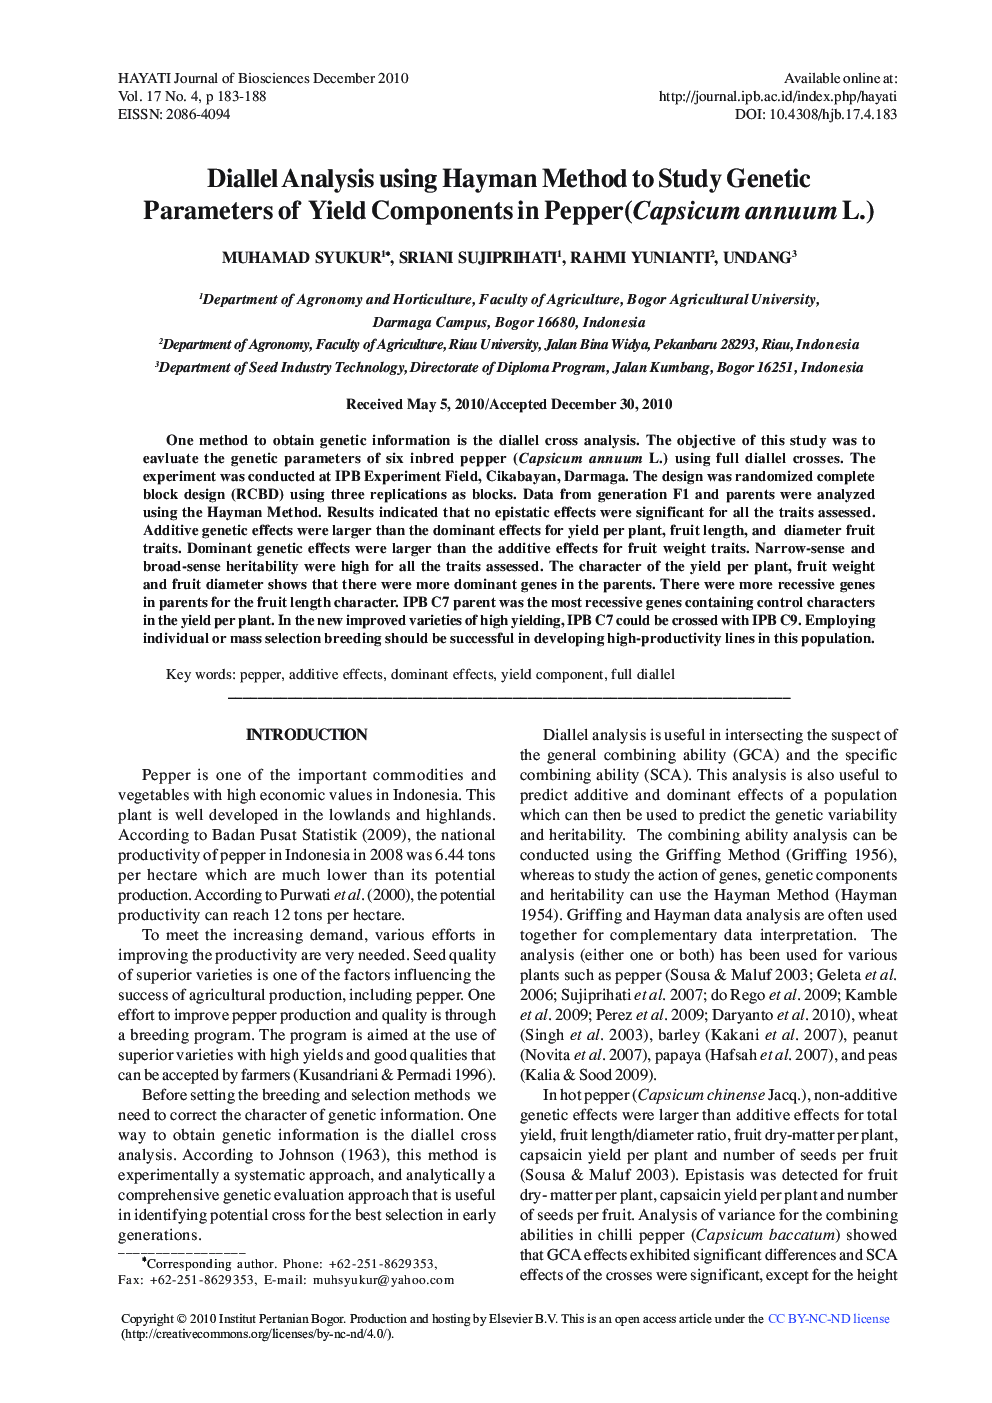 Diallel Analysis using Hayman Method to Study Genetic Parameters of Yield Components in Pepper(Capsicum annuum L.)